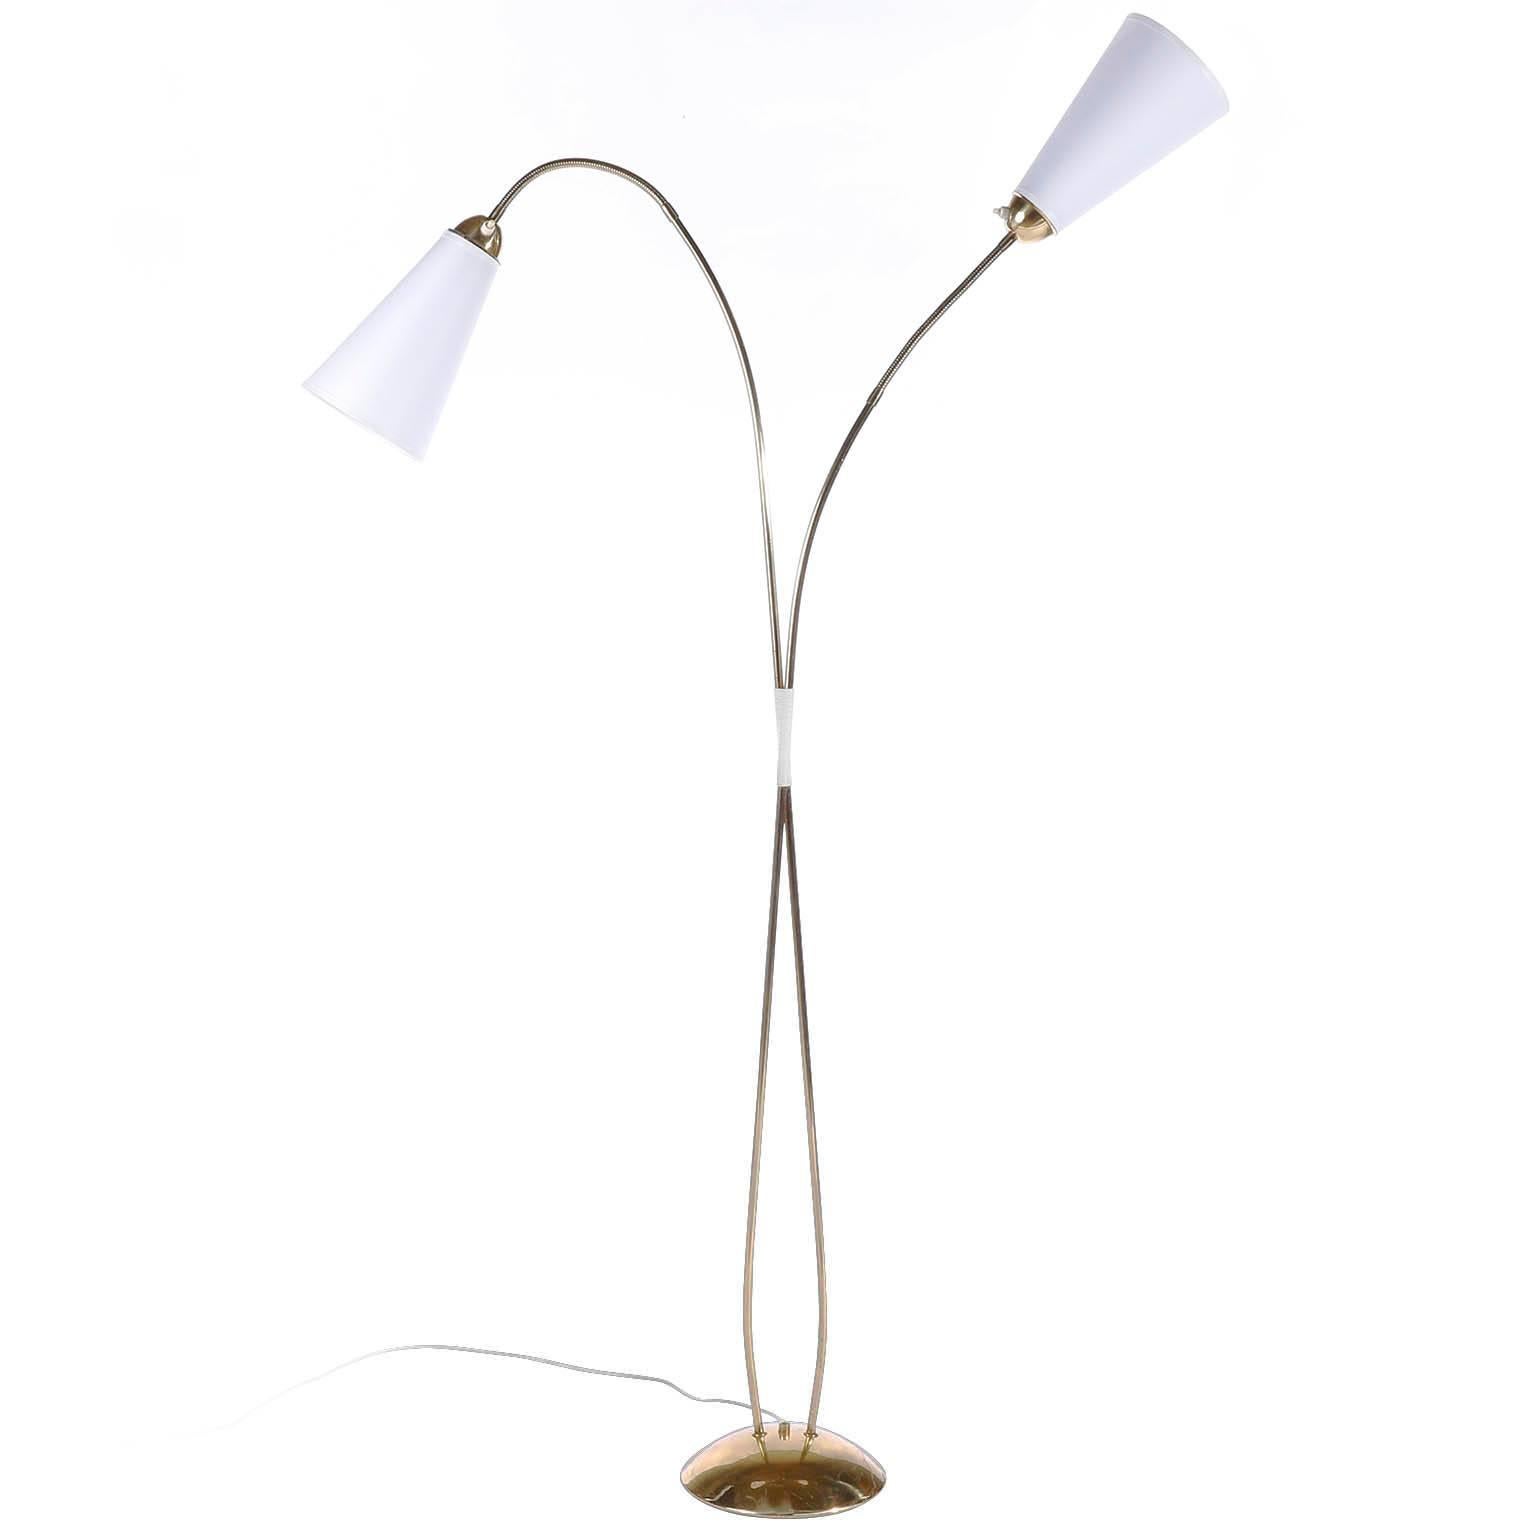 A brass floor lamp with two flexible arms by Rupert Nikoll, Vienna, Austria, manufactured in midcentury, circa 1960 (late 1950s or early 1960s).
The stand is made of two curved brass rods with a handle made of a white plastic string. At the end of